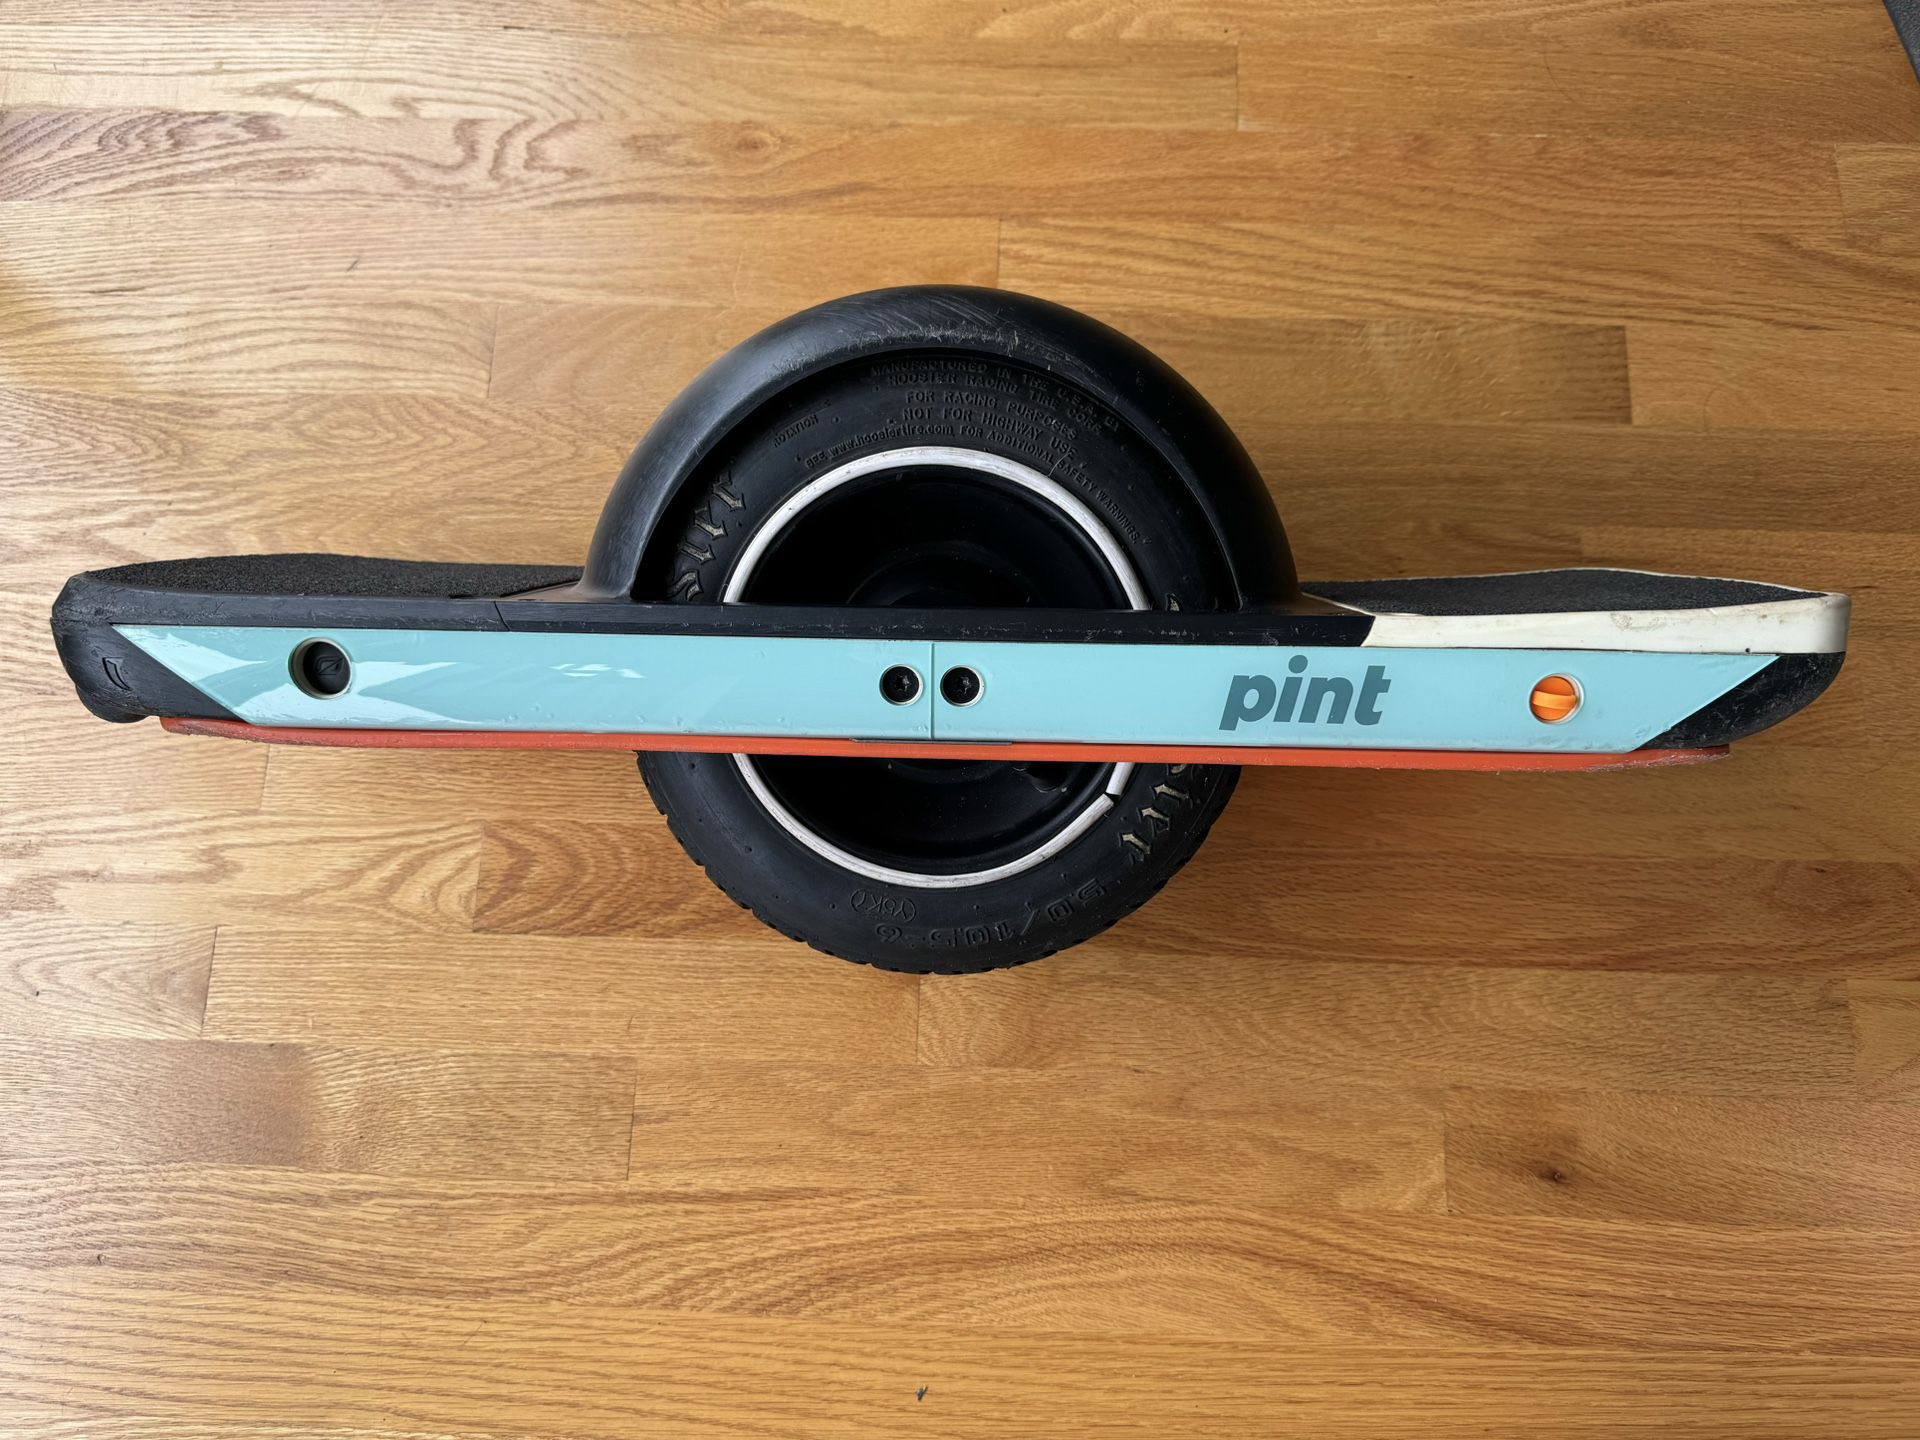 Onewheel Pint WITH JW Extended Range Battery!